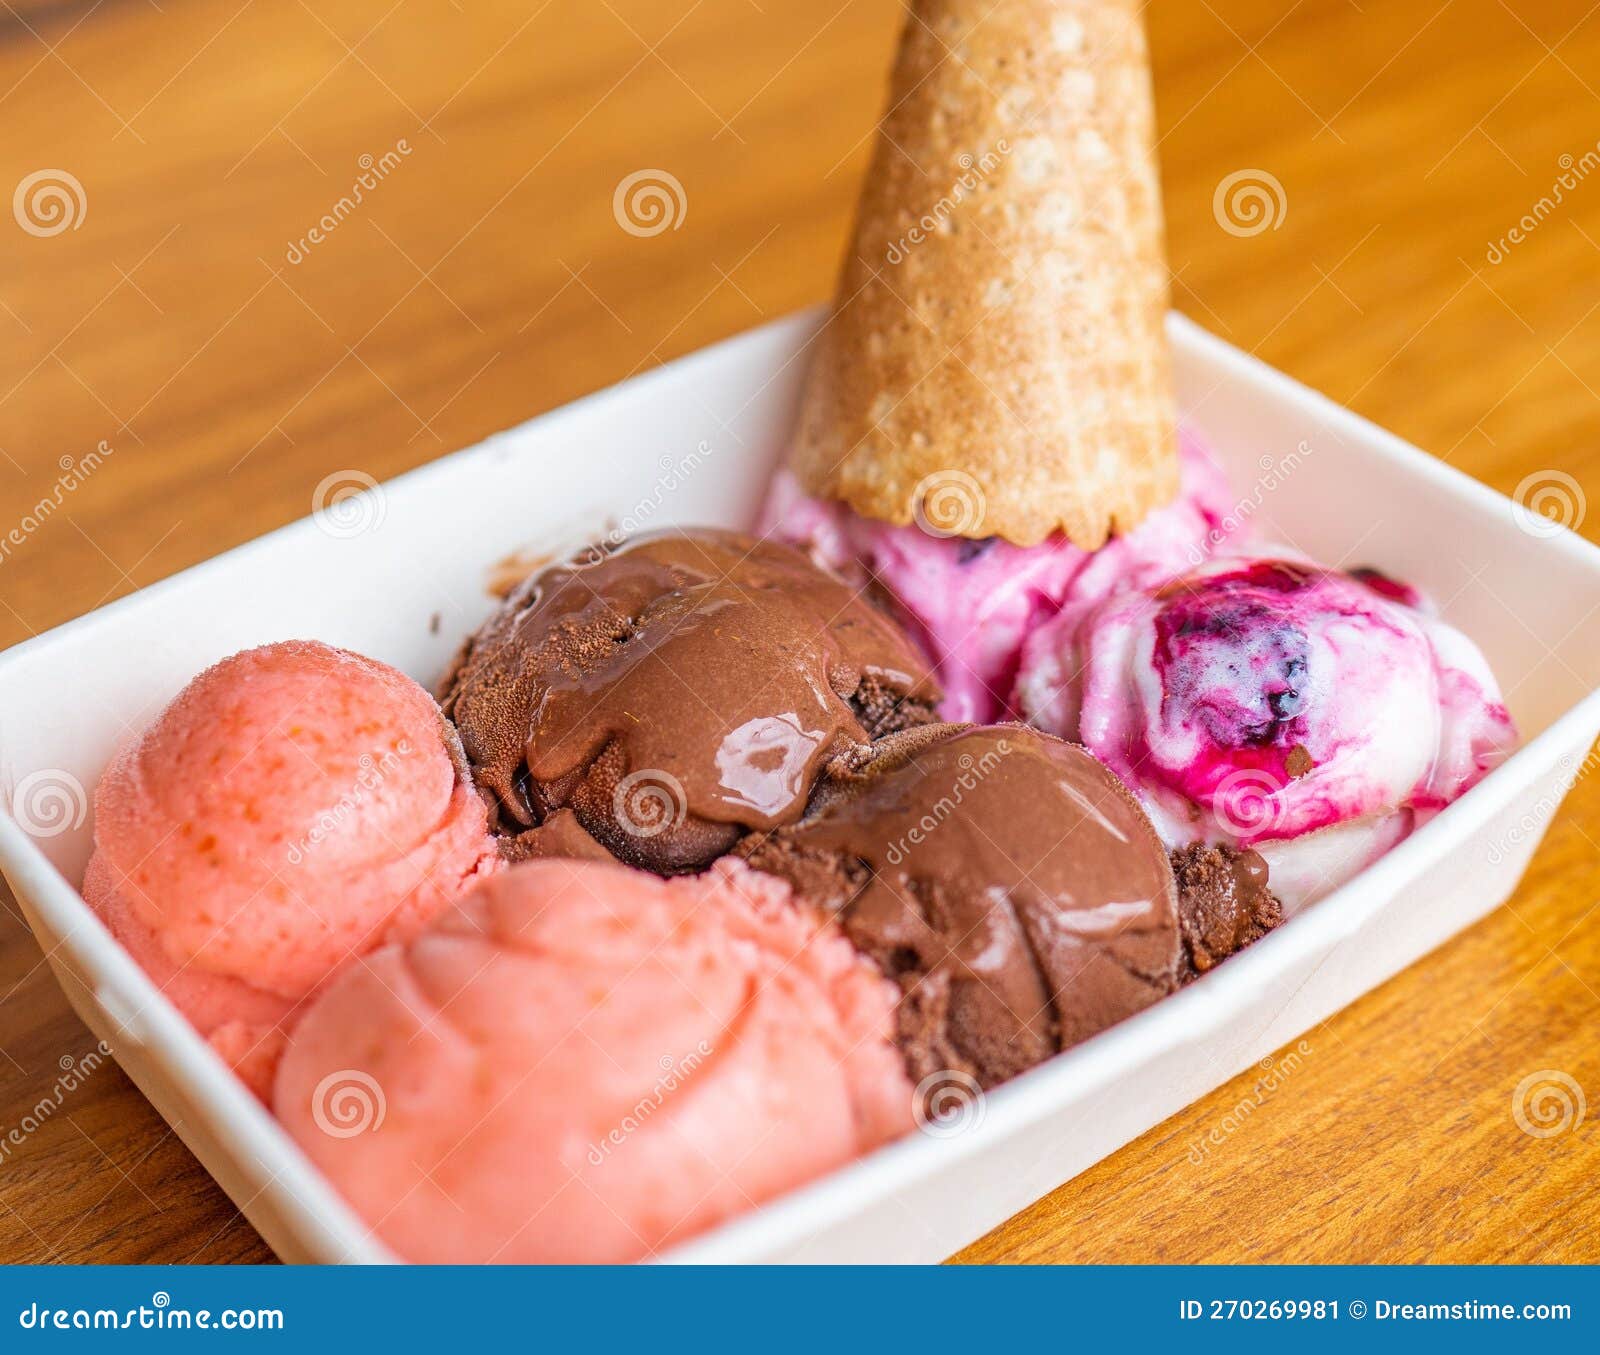 horizontal photo of delicious and creamy chocolate ice cream, strawberry and blackberry with a cono